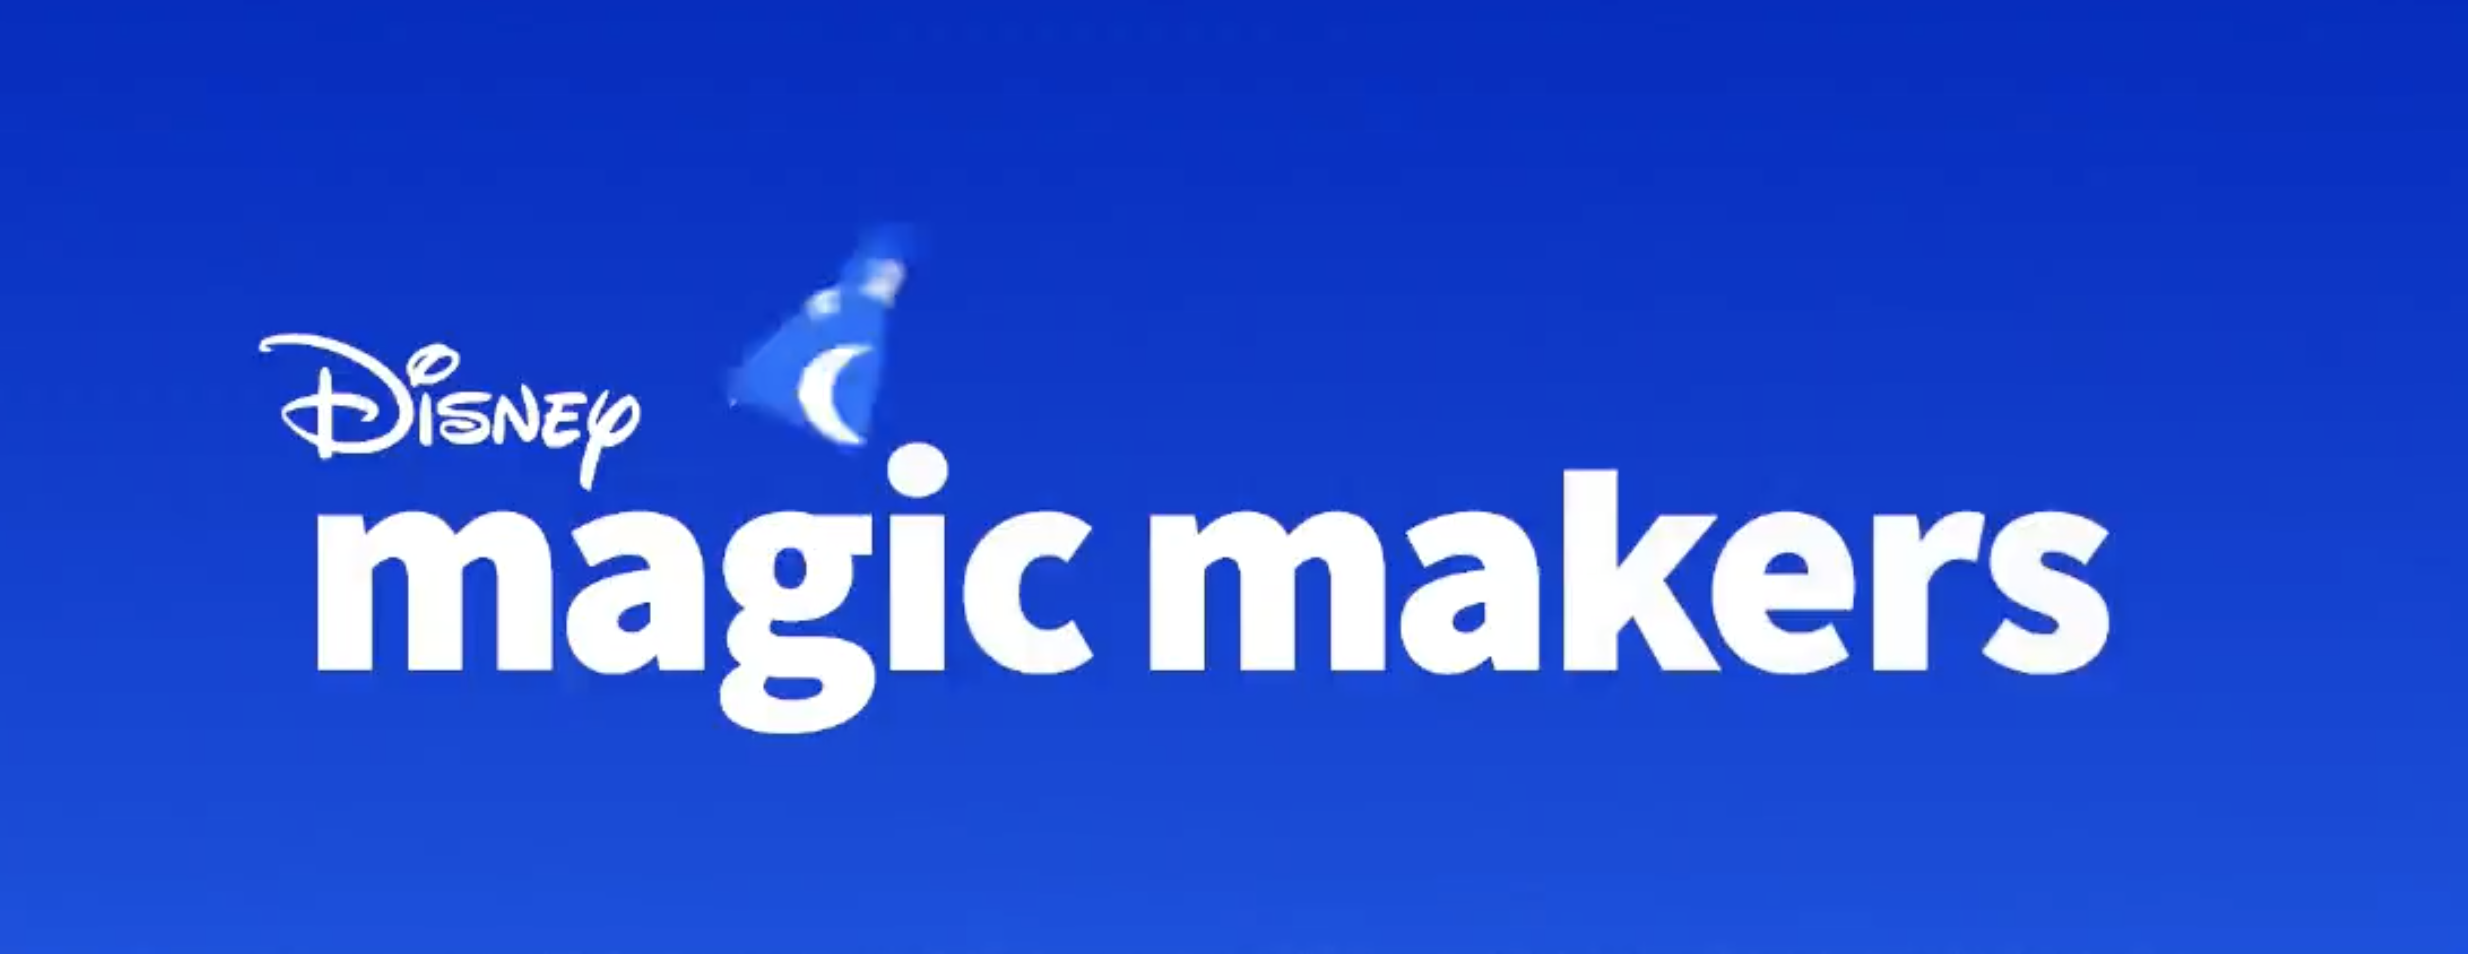 50 'Magic Makers' to Win WDW Vacations- and YOU Can Nominate the